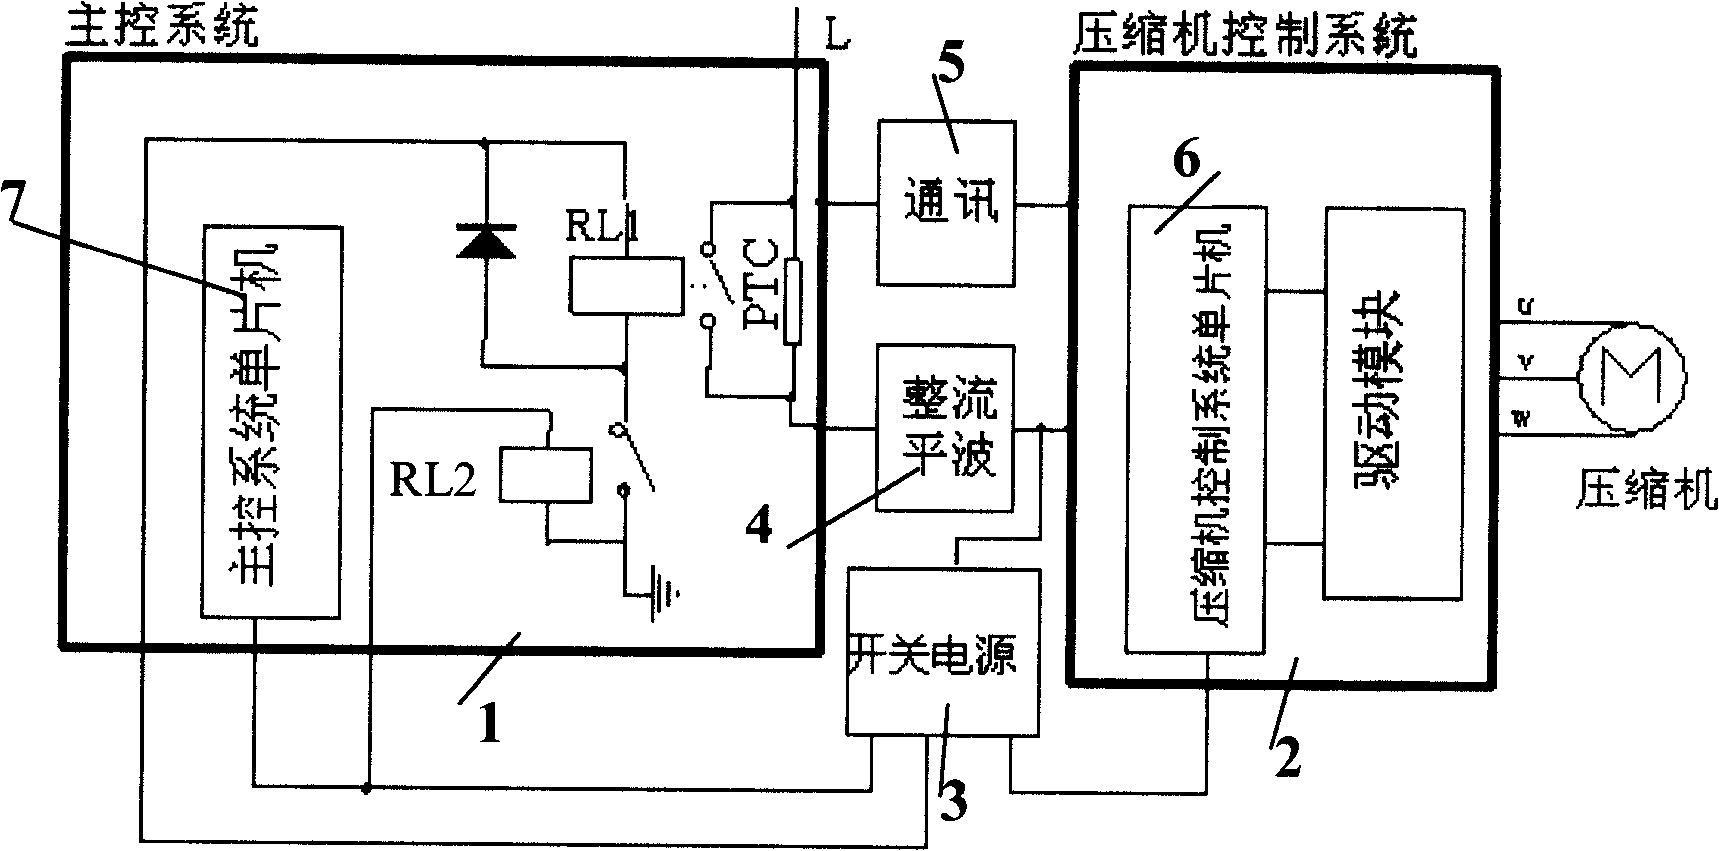 Circuit for preventing powered on moment impact in frequency converting air conditioner